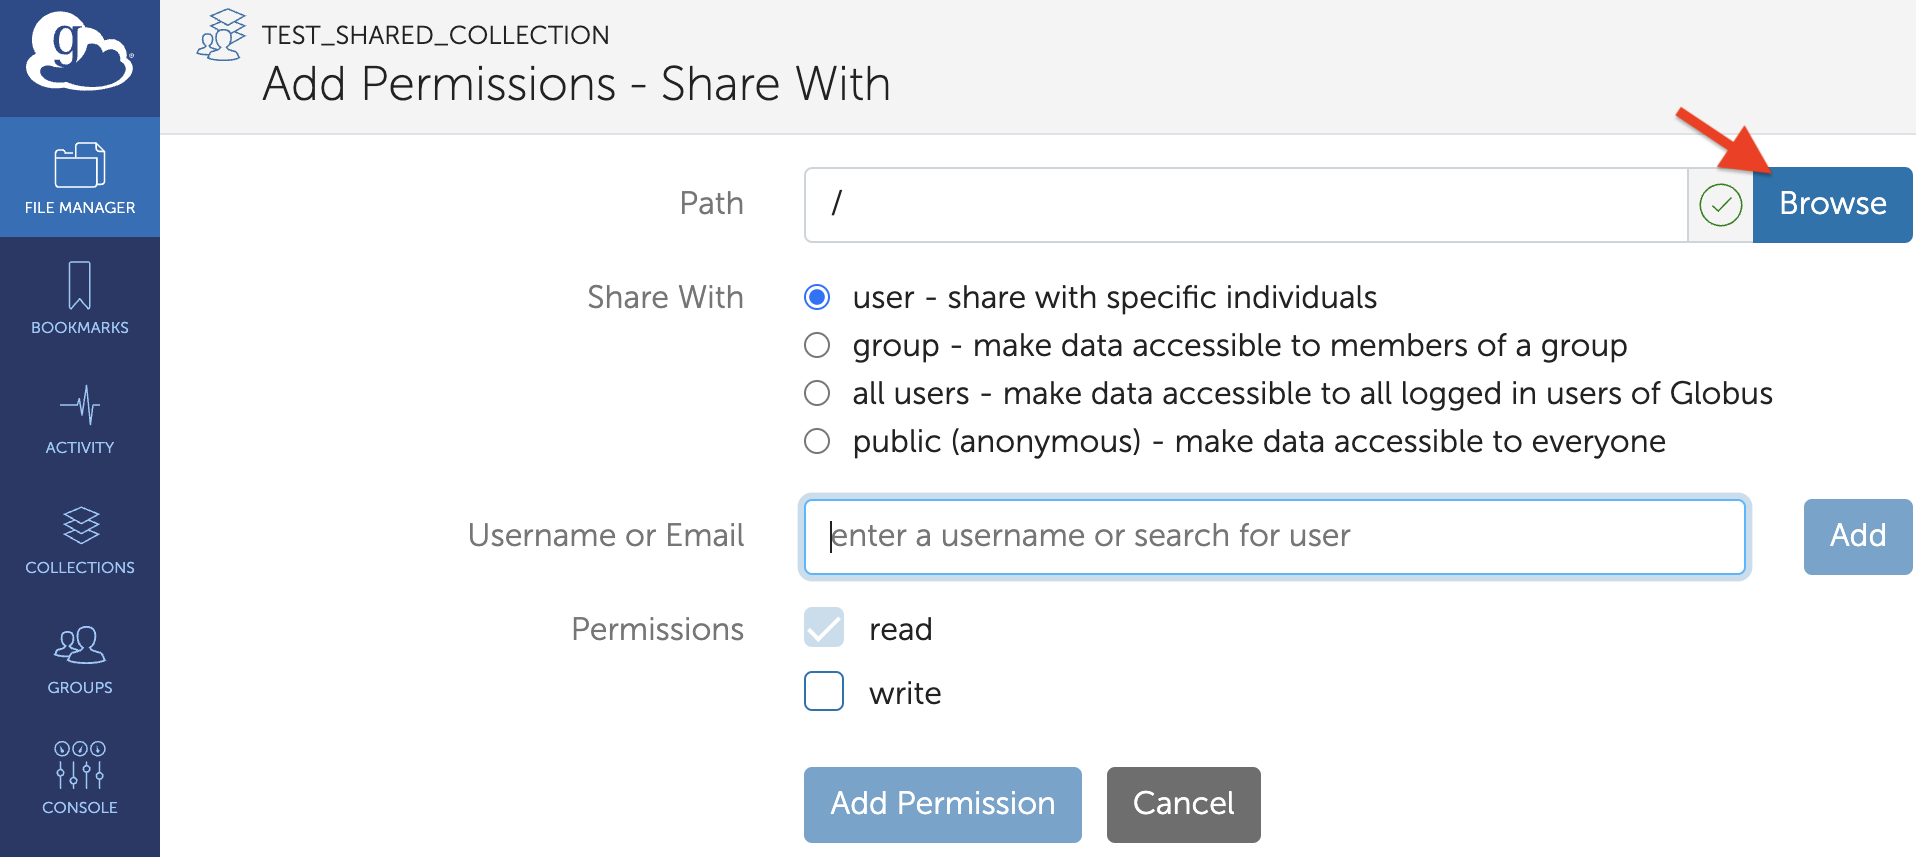 Test endpoint Add Permissions Share With form.